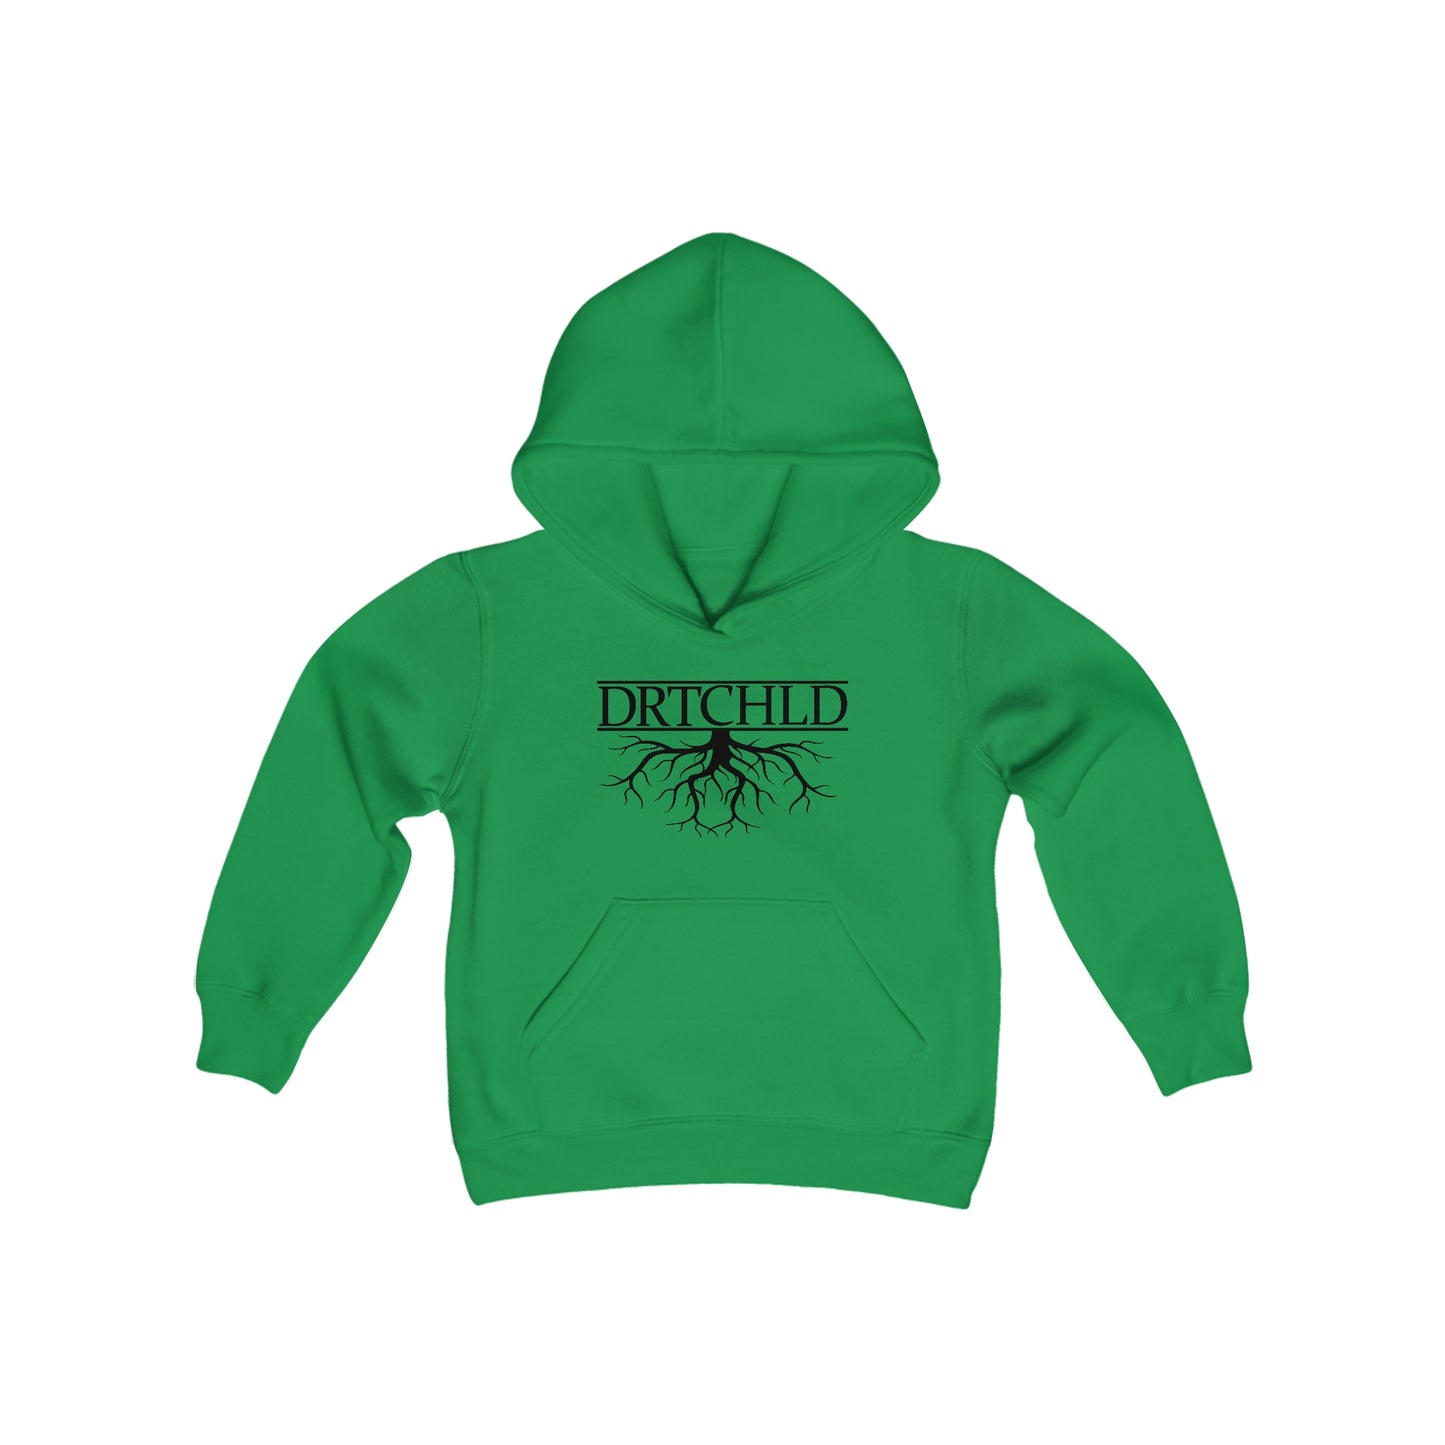 "DRTCHLD" Youth Hoodie